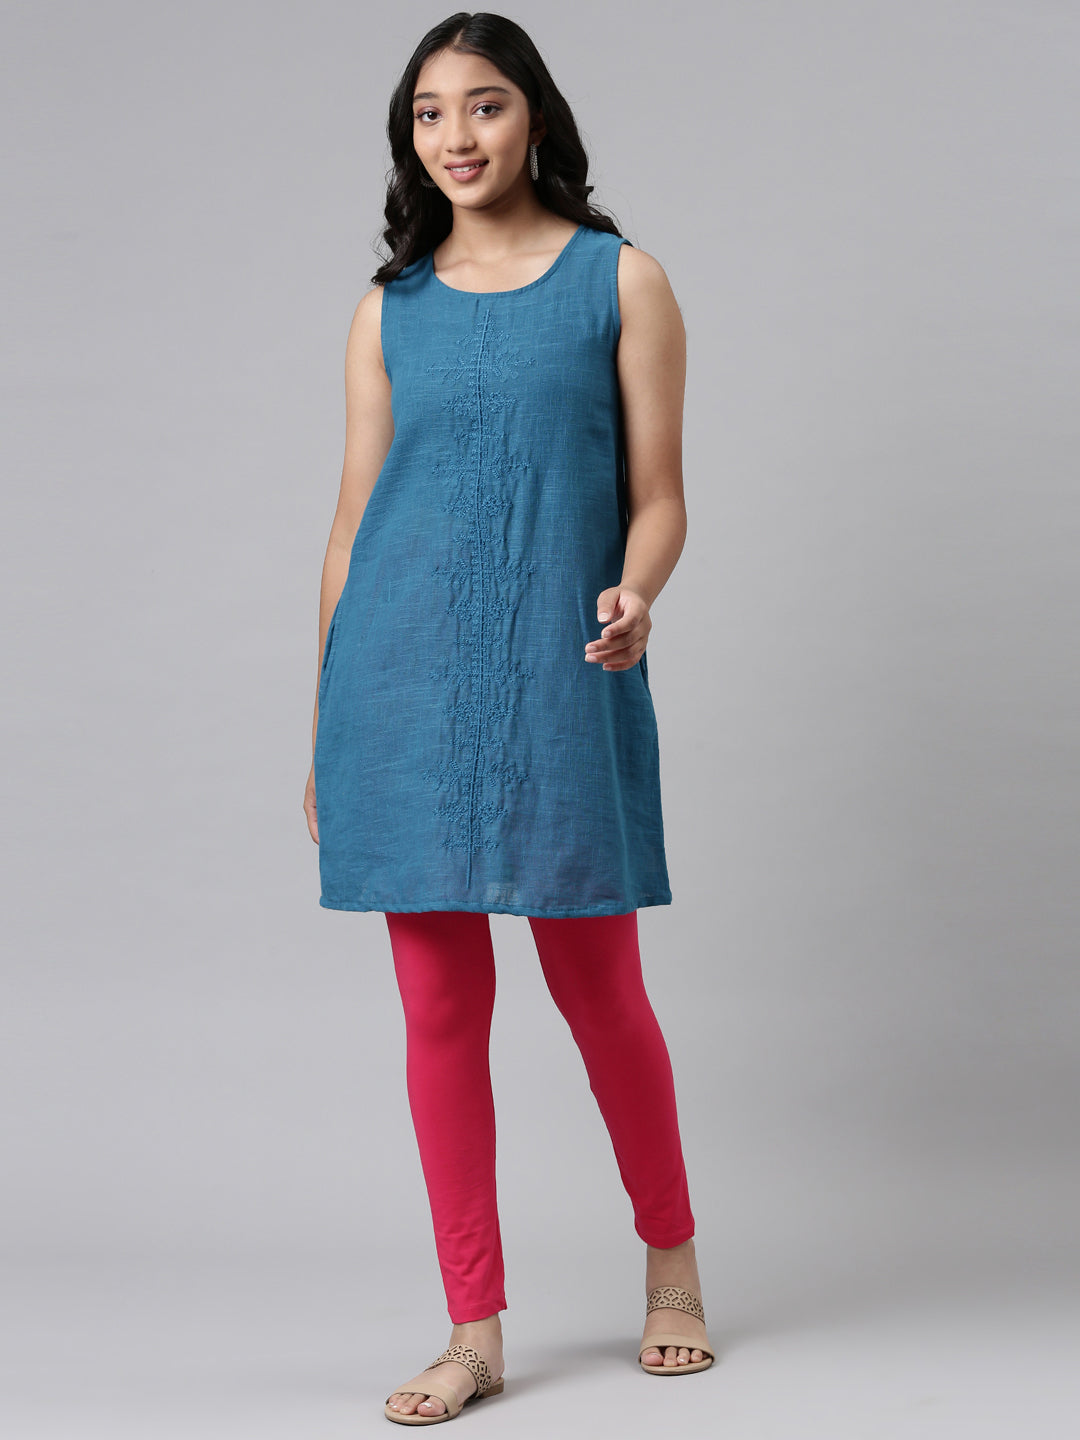 Buy GO COLORS Women Greys Mid Rise Solid Cotton Warm Kurti Pant - S Regular  Fit at Amazon.in